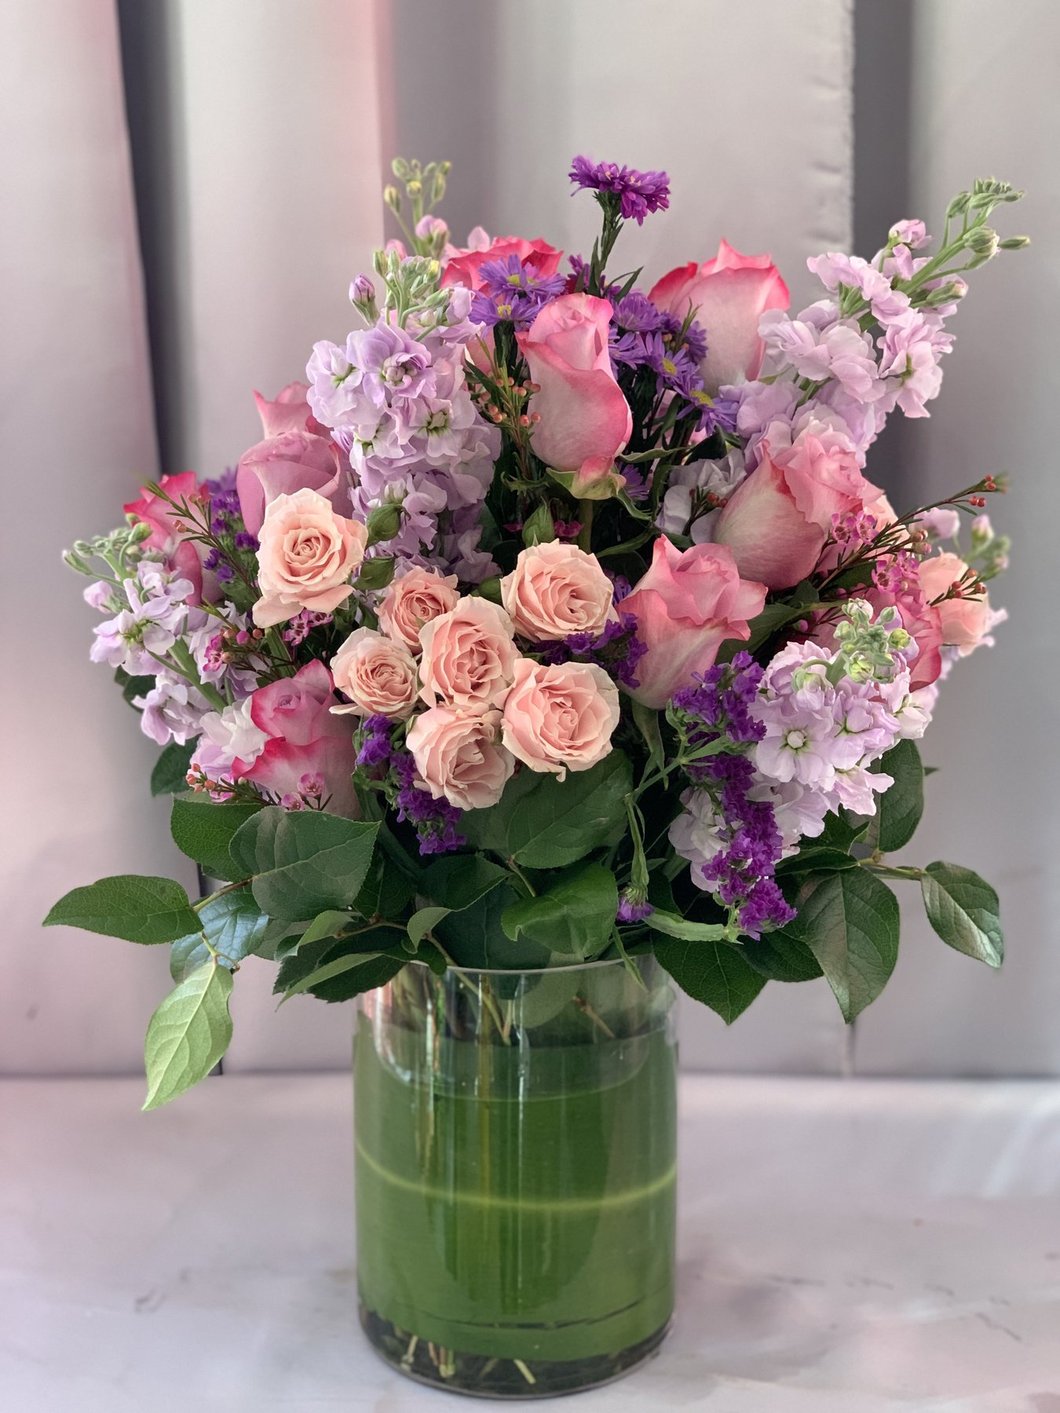 Mix of pink and purple flowers